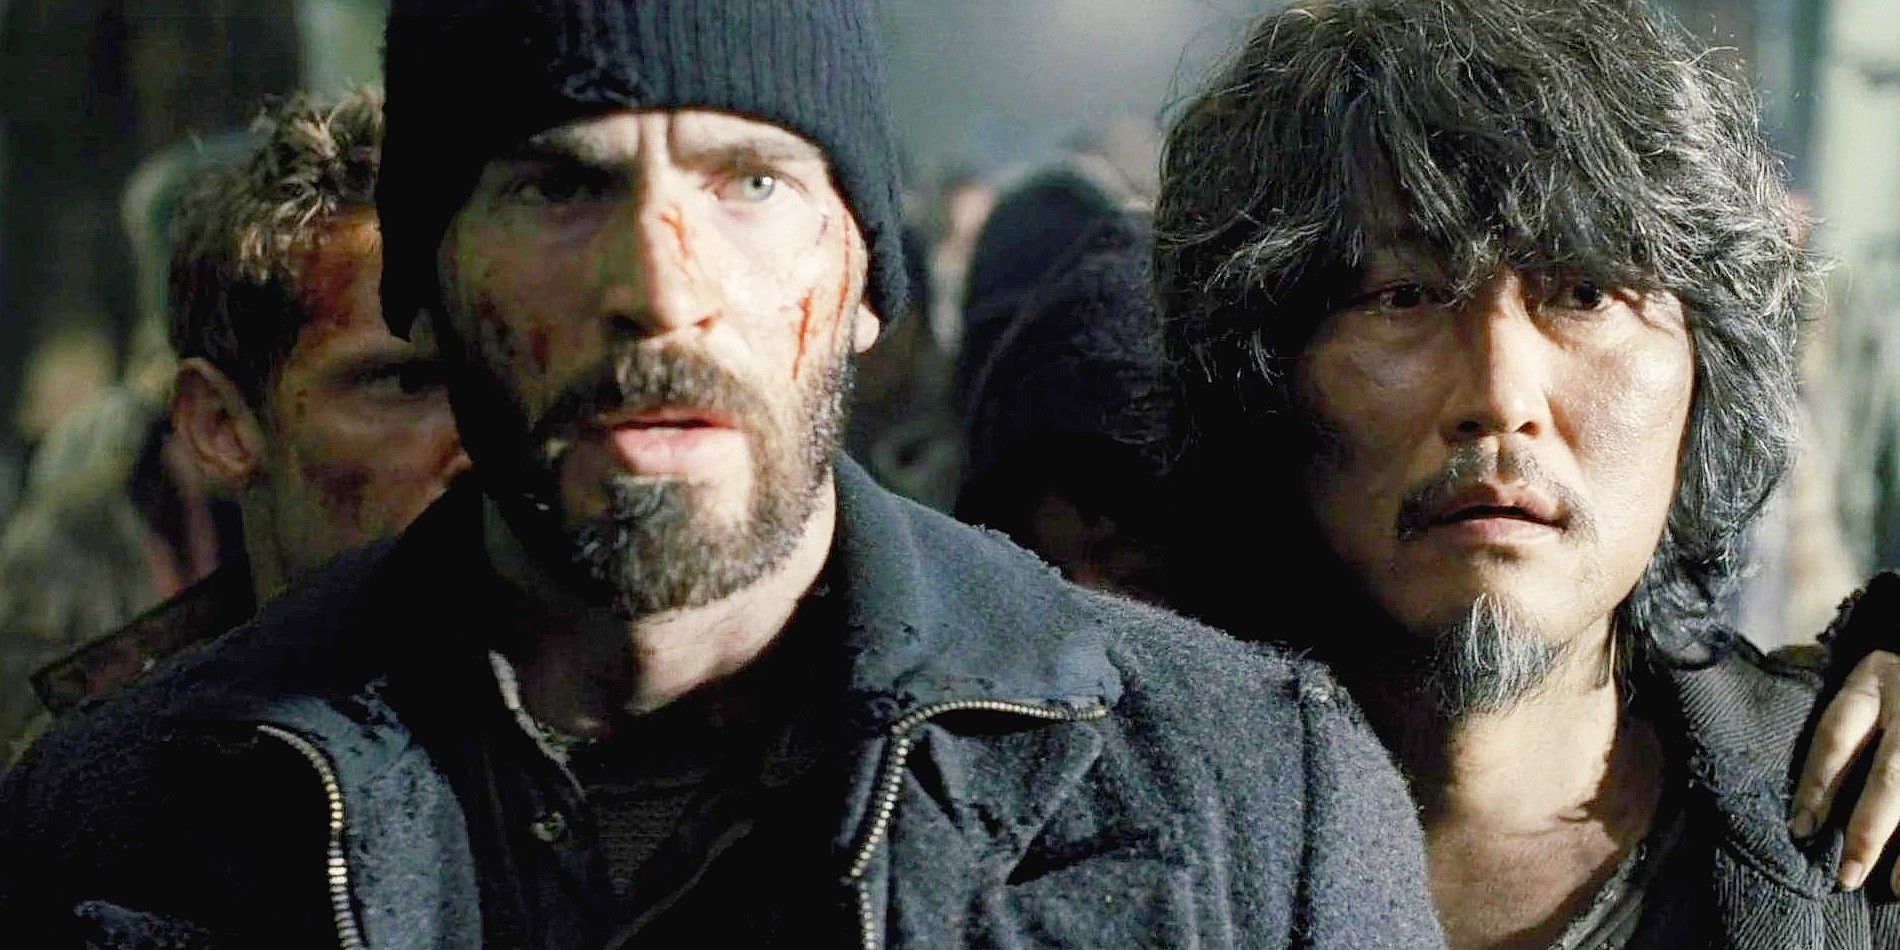 Curtis (Chris Evans) and Namgoong (Song Kang-Ho) next to each other looking stunned in Snowpiercer